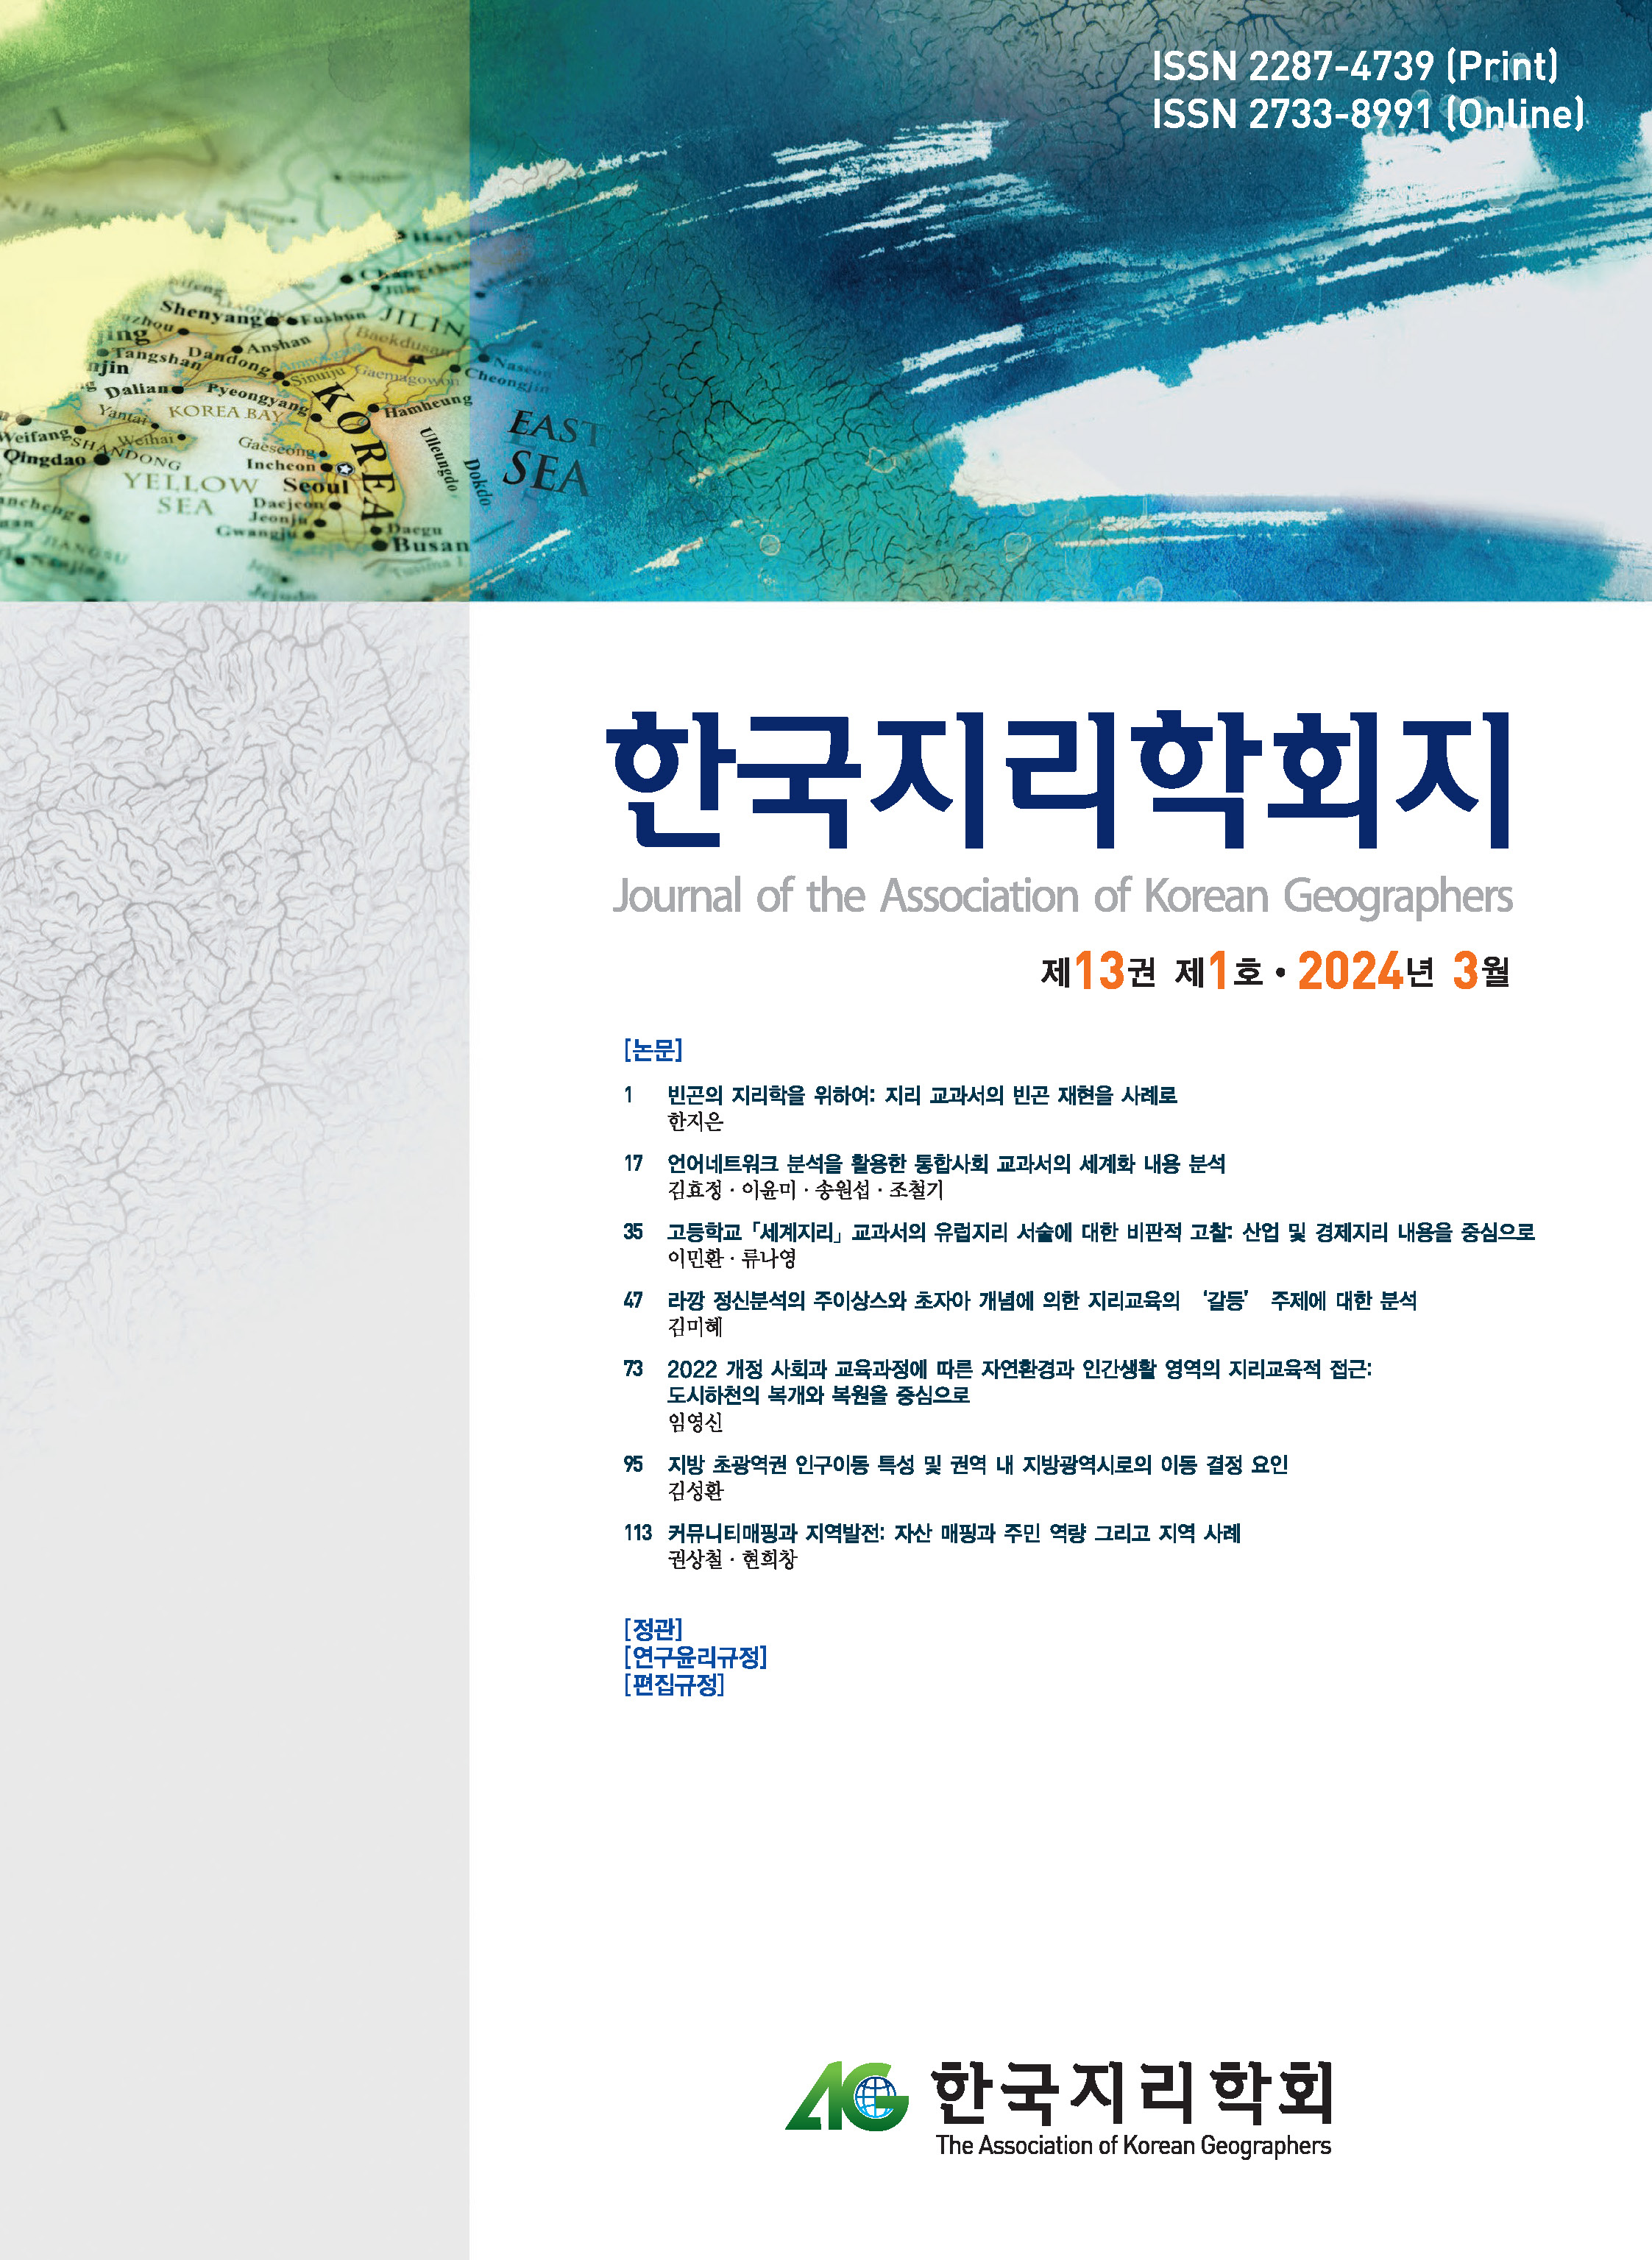 Journal of the Association of Korean Geographers